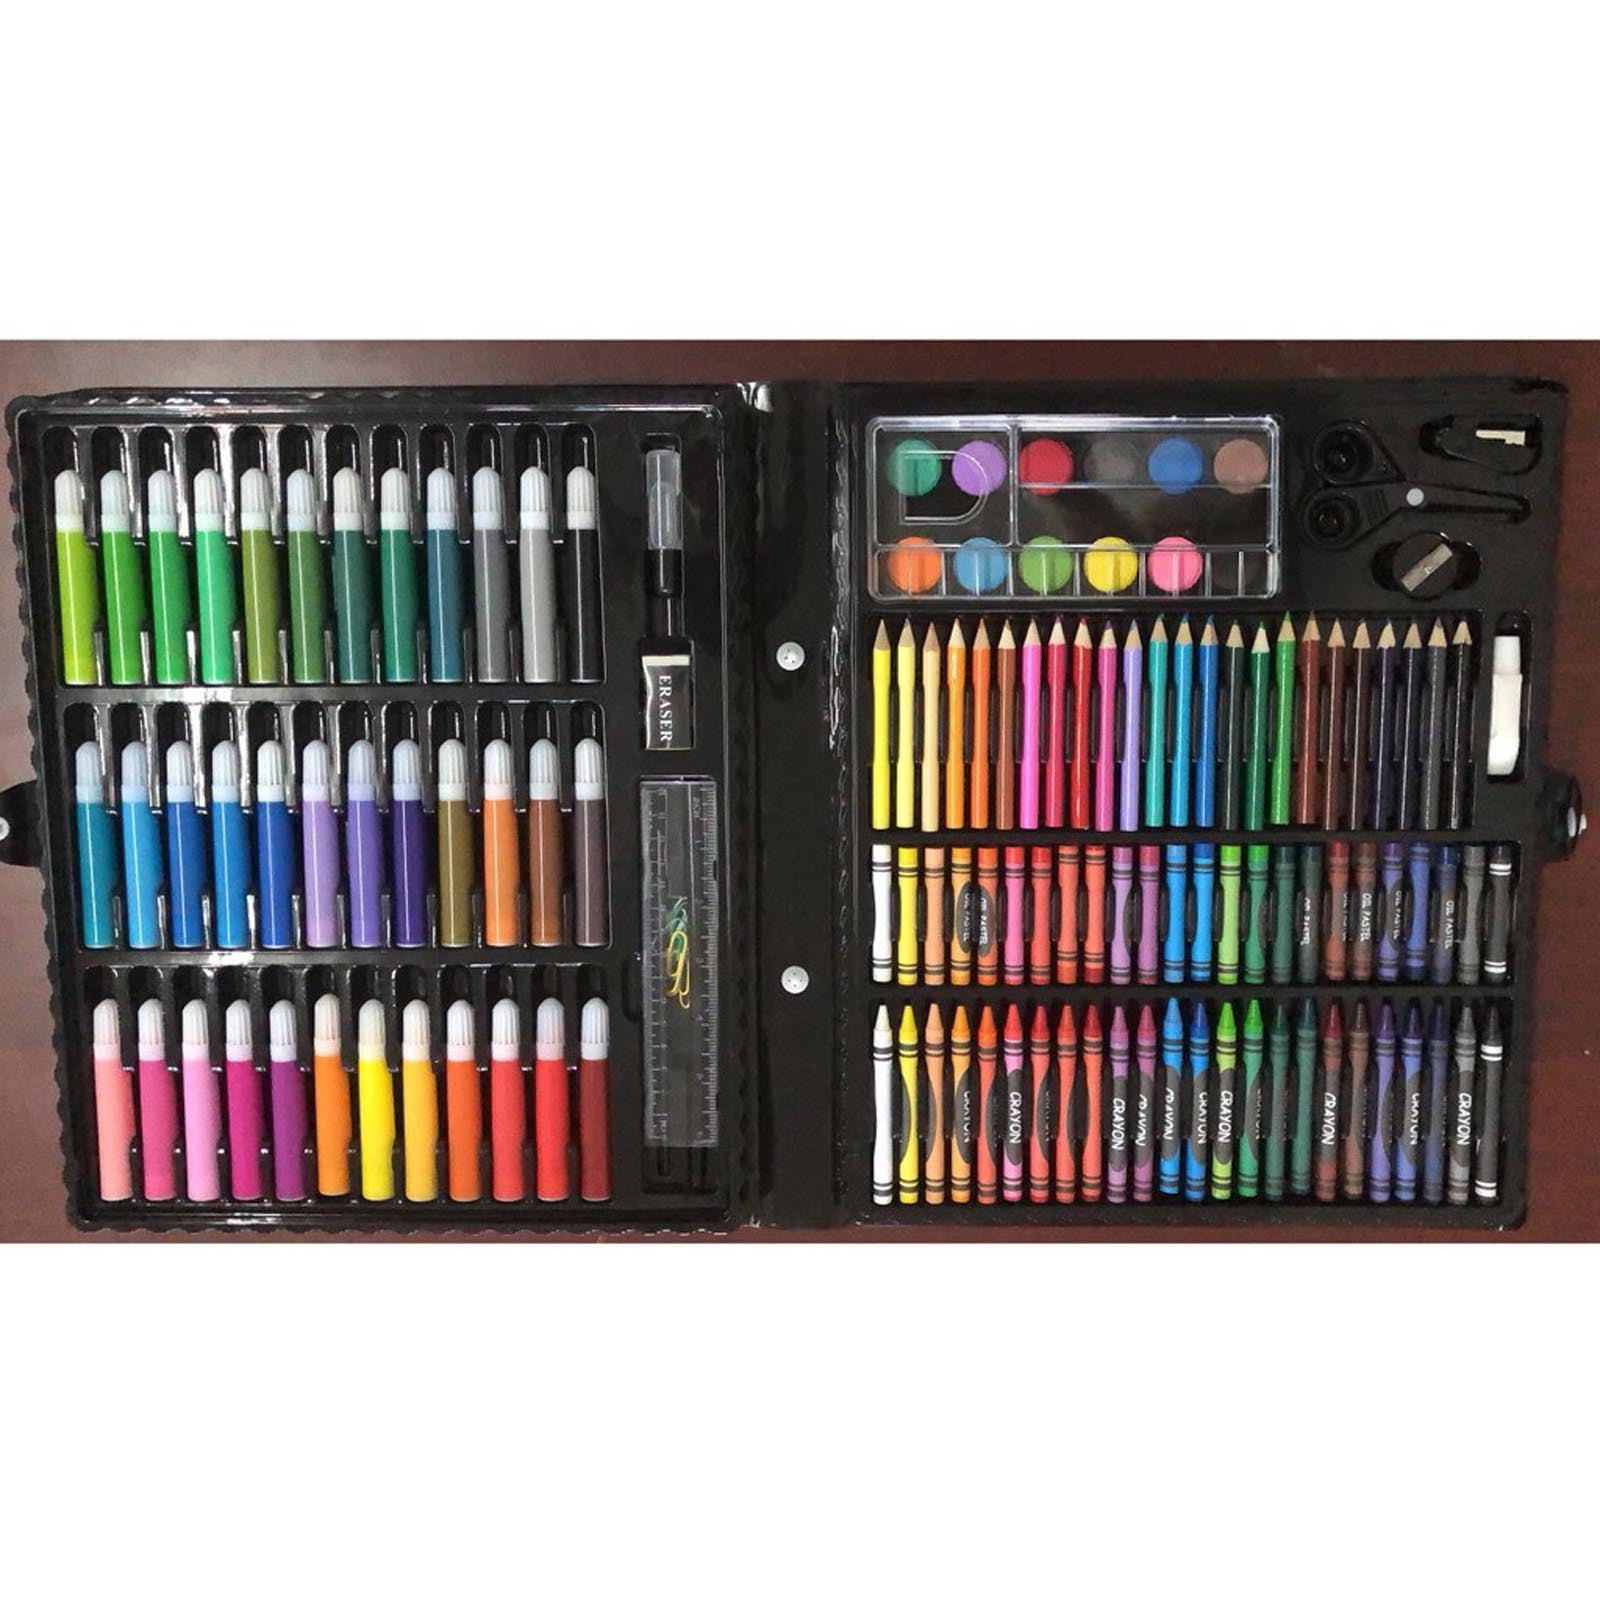 Arteza Kids Fantasy Coloring Kit, 3 Canvas Panels, 4 x 4 in, 10 Markers, 16 Watercolor Pencils, 1 Paint Brush, 1 Sharpener, Kids Activities for Ages